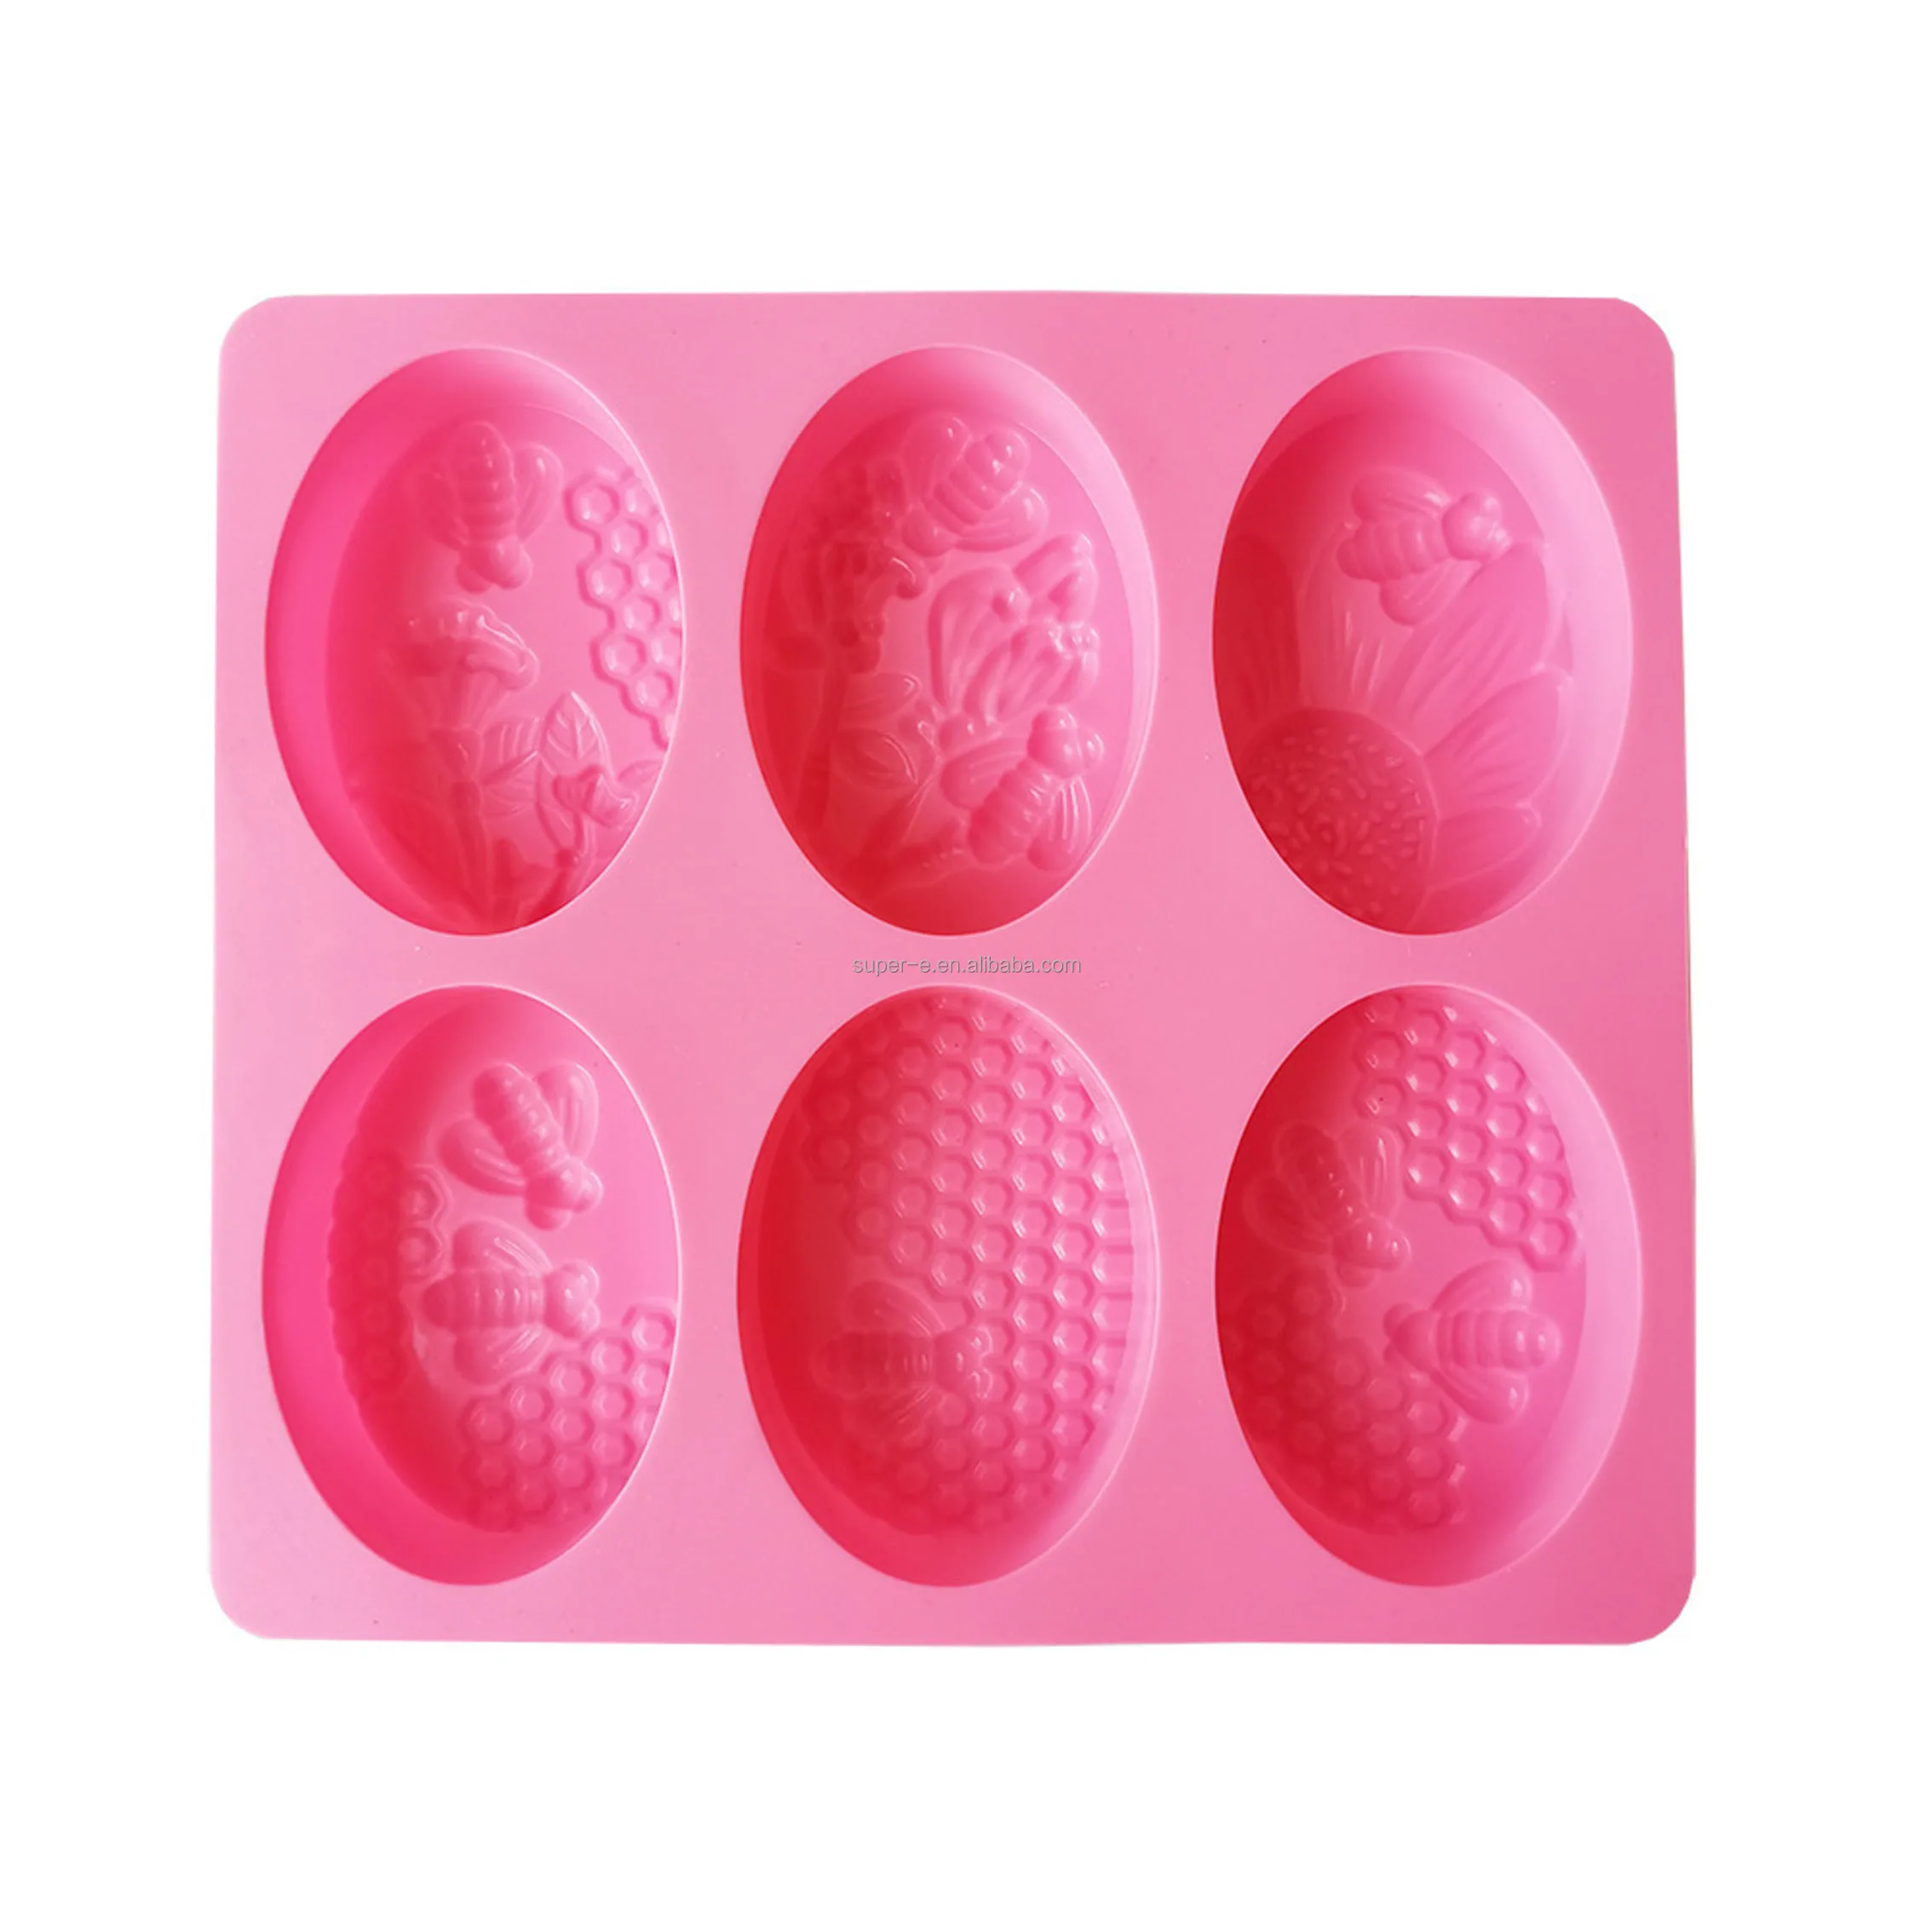 6 hole honey bee and honeycomb shape soap mold silicone cake mold silicone hand make diy soap candle resin silicone bpa free